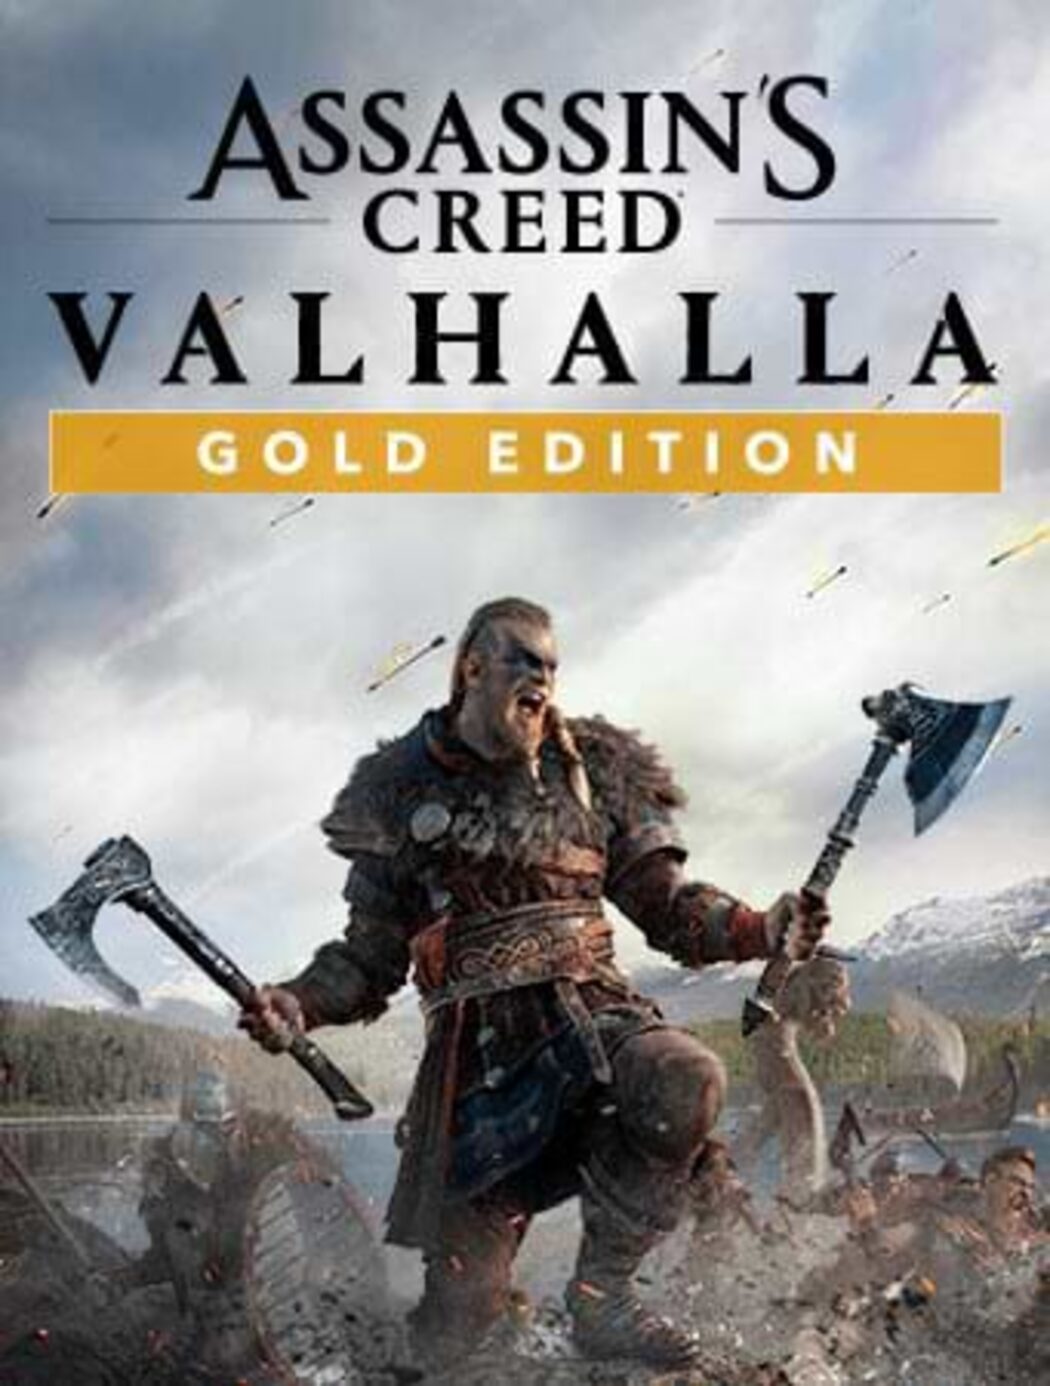 Buy cheap Assassin's Creed Valhalla cd key - lowest price